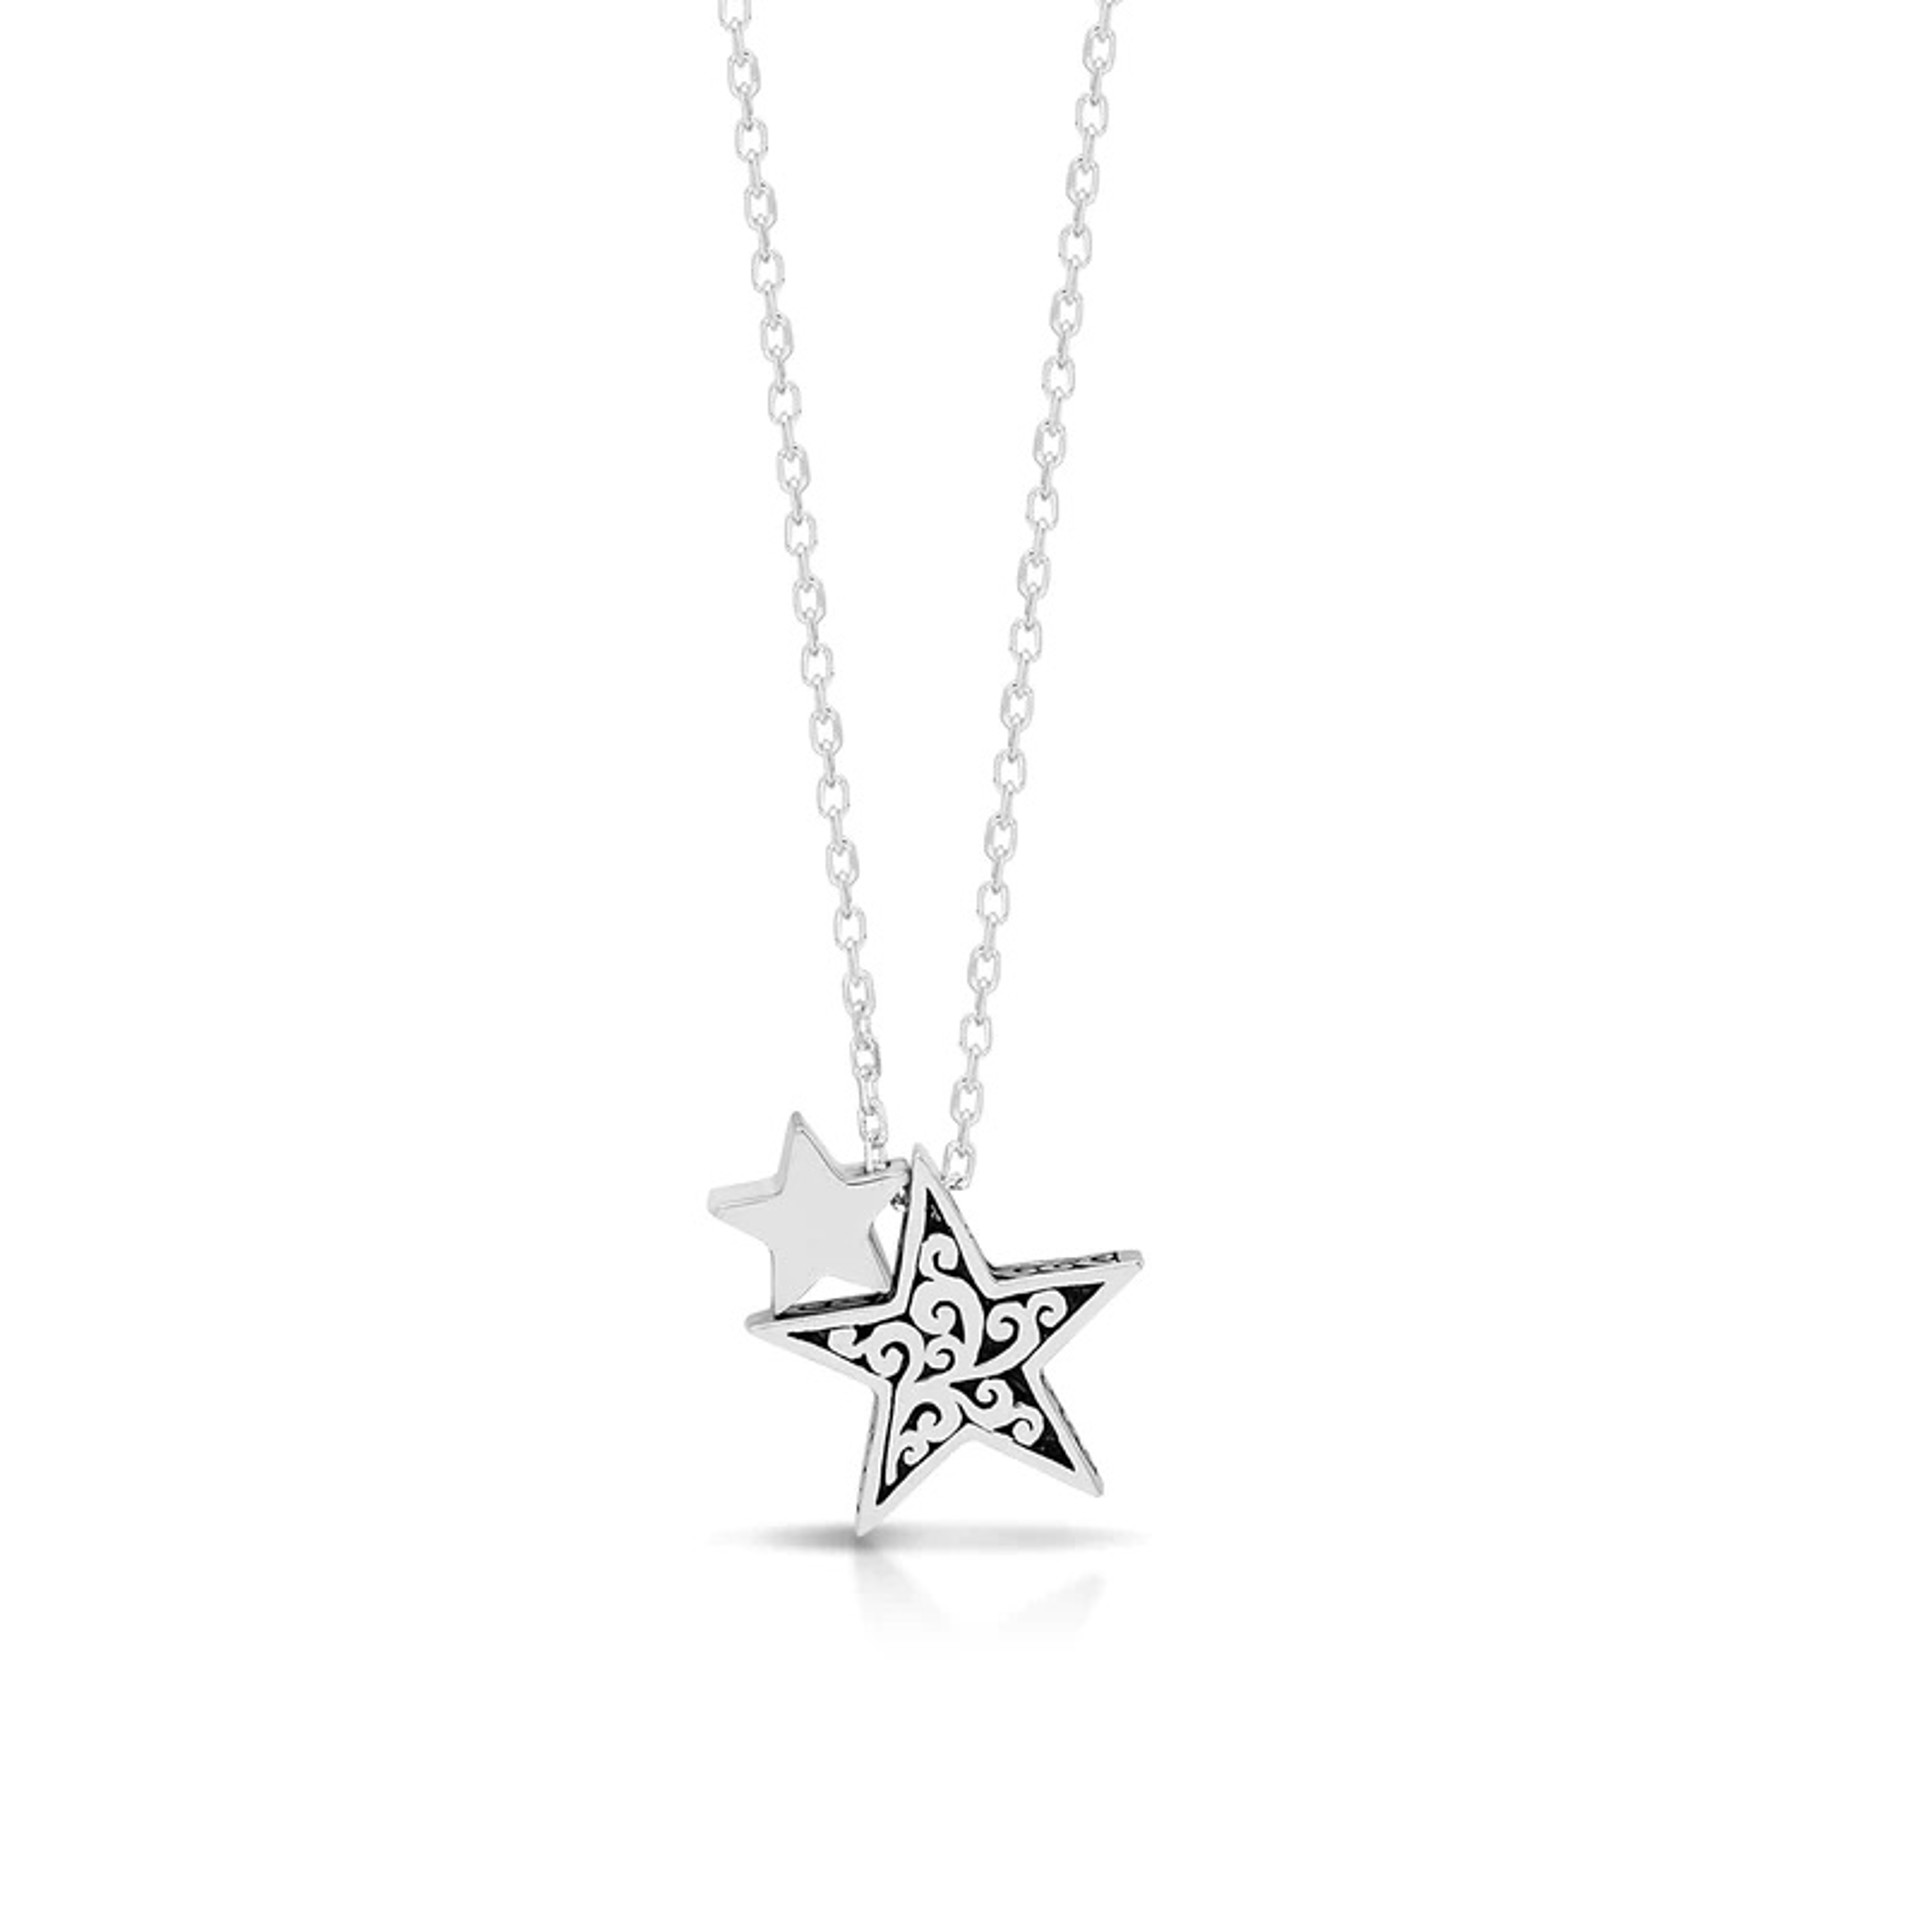 1094 LH Signature Scroll Sterling Silver Delicate Double Stars Pendant Necklace in 18" Adjustable Chain. Pendant size 13mm (SO) by Lois Hill